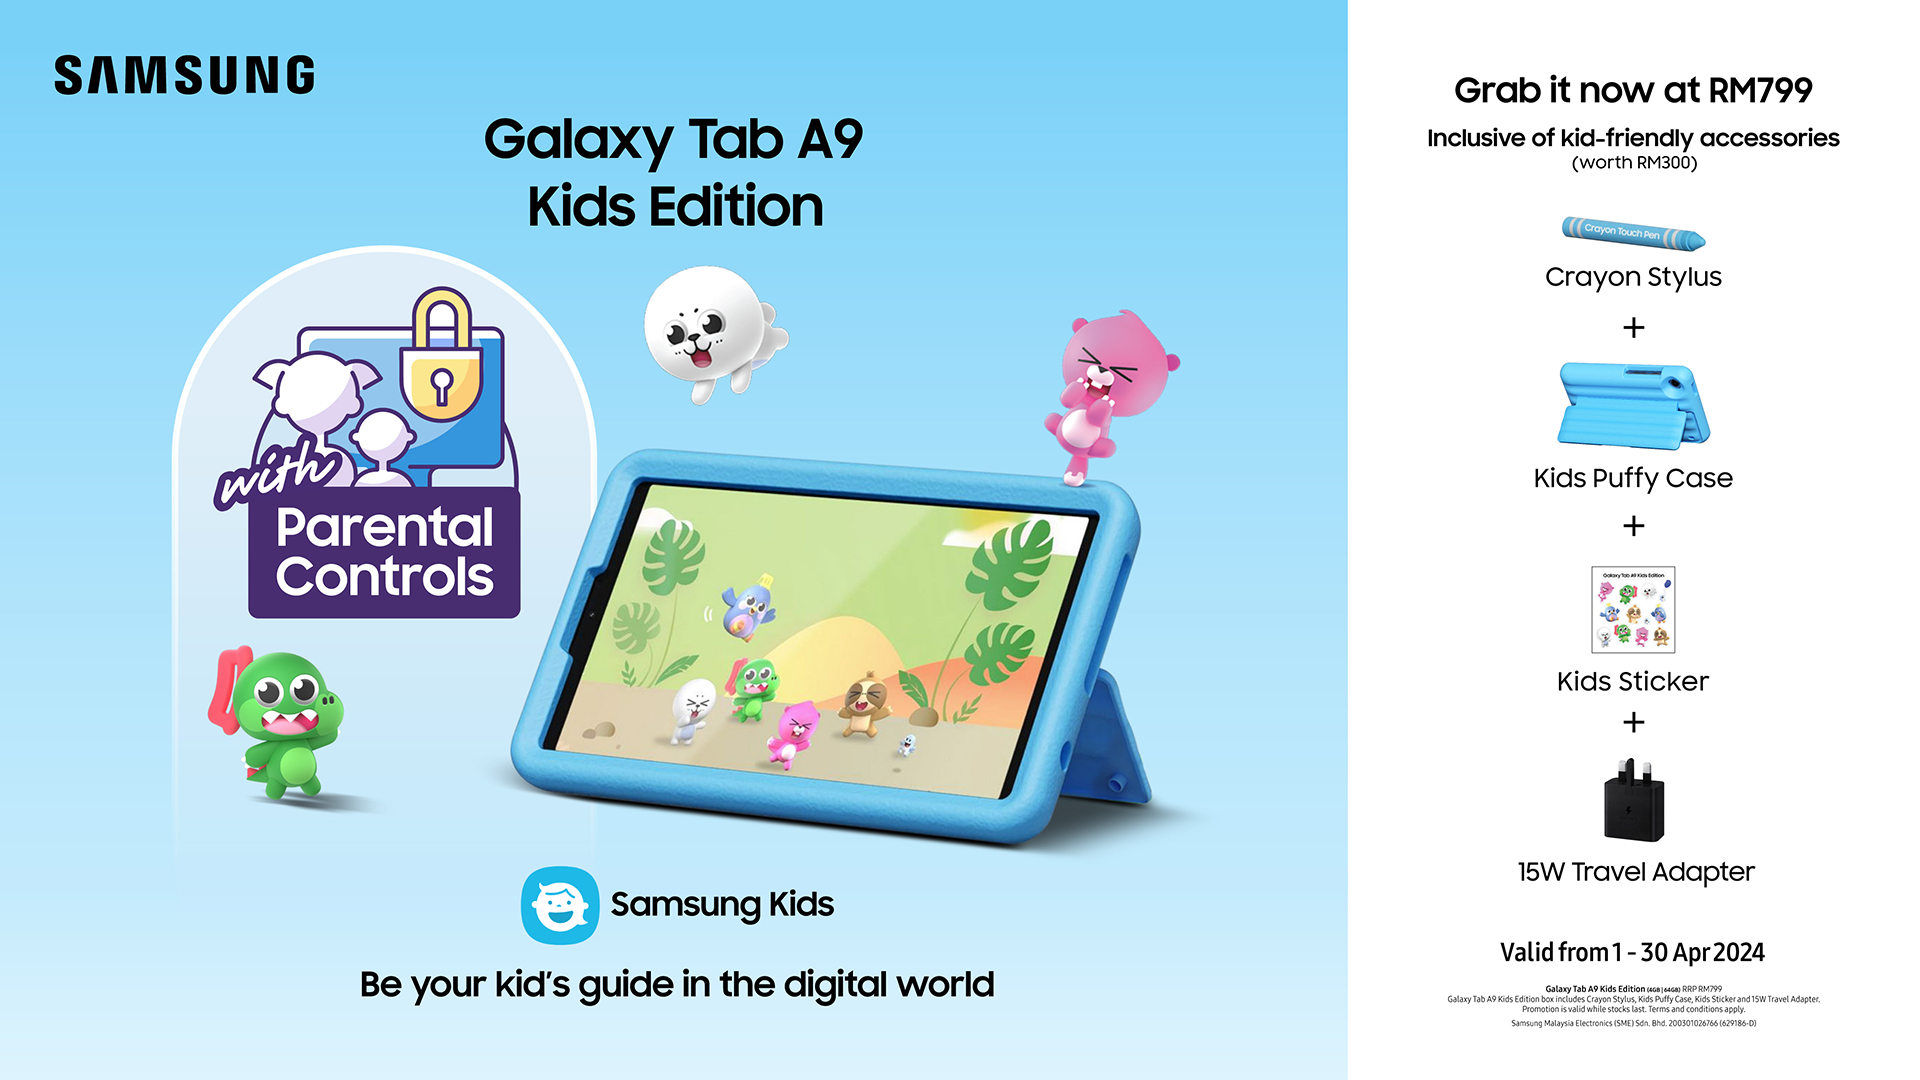 Samsung Galaxy Tab A9 Kids Edition: Child-friendly tablet with crayon stylus for RM799